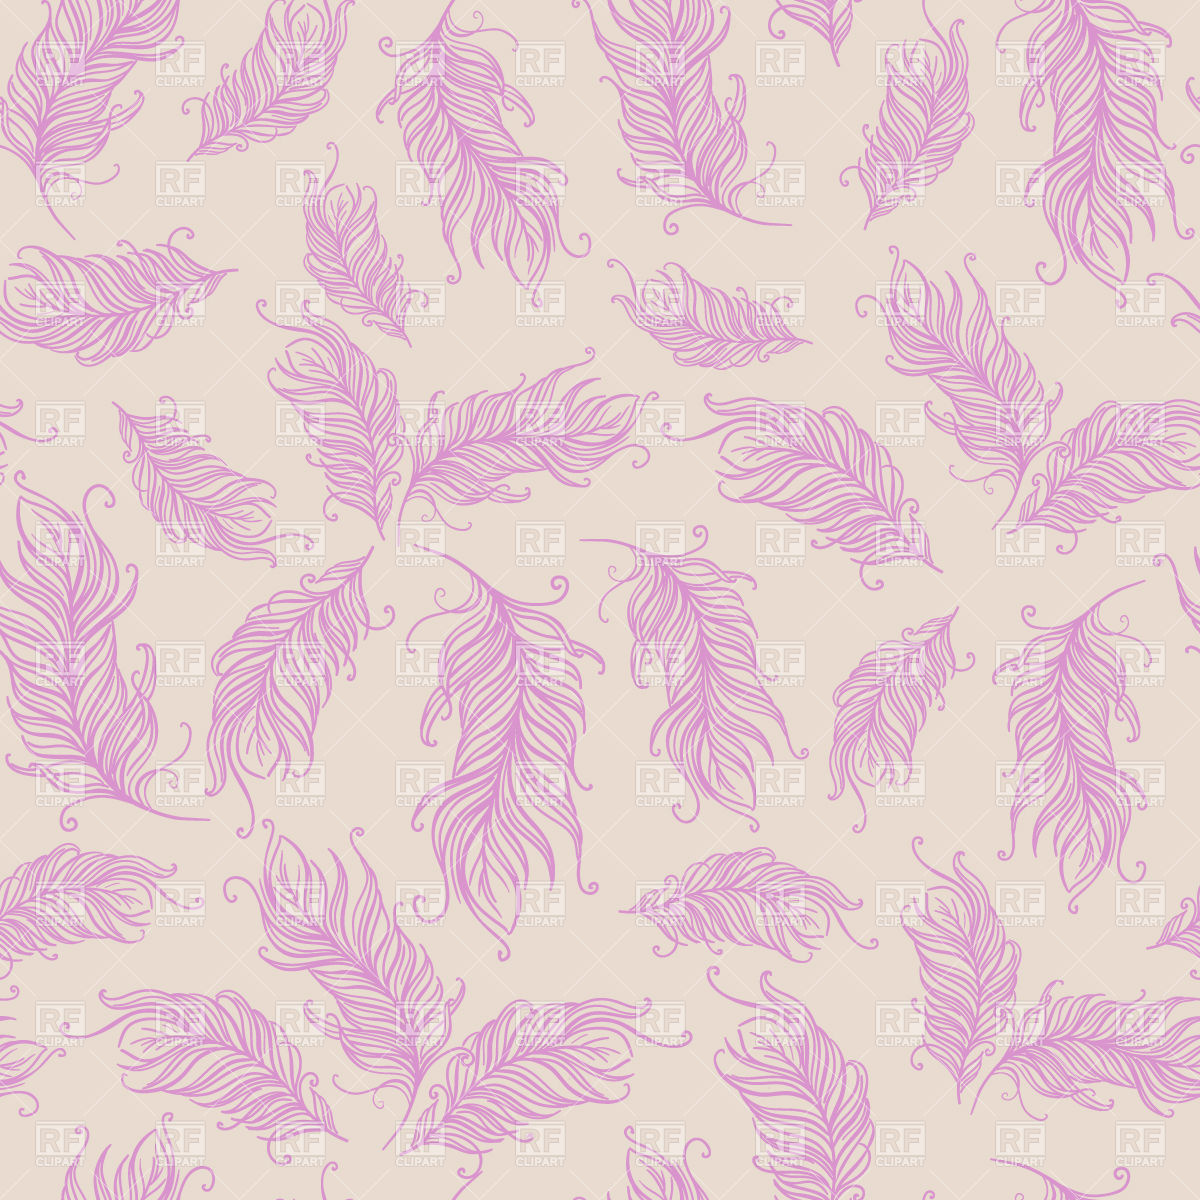 Seamless Wallpaper With Pink Feathers Vector Image Of Background